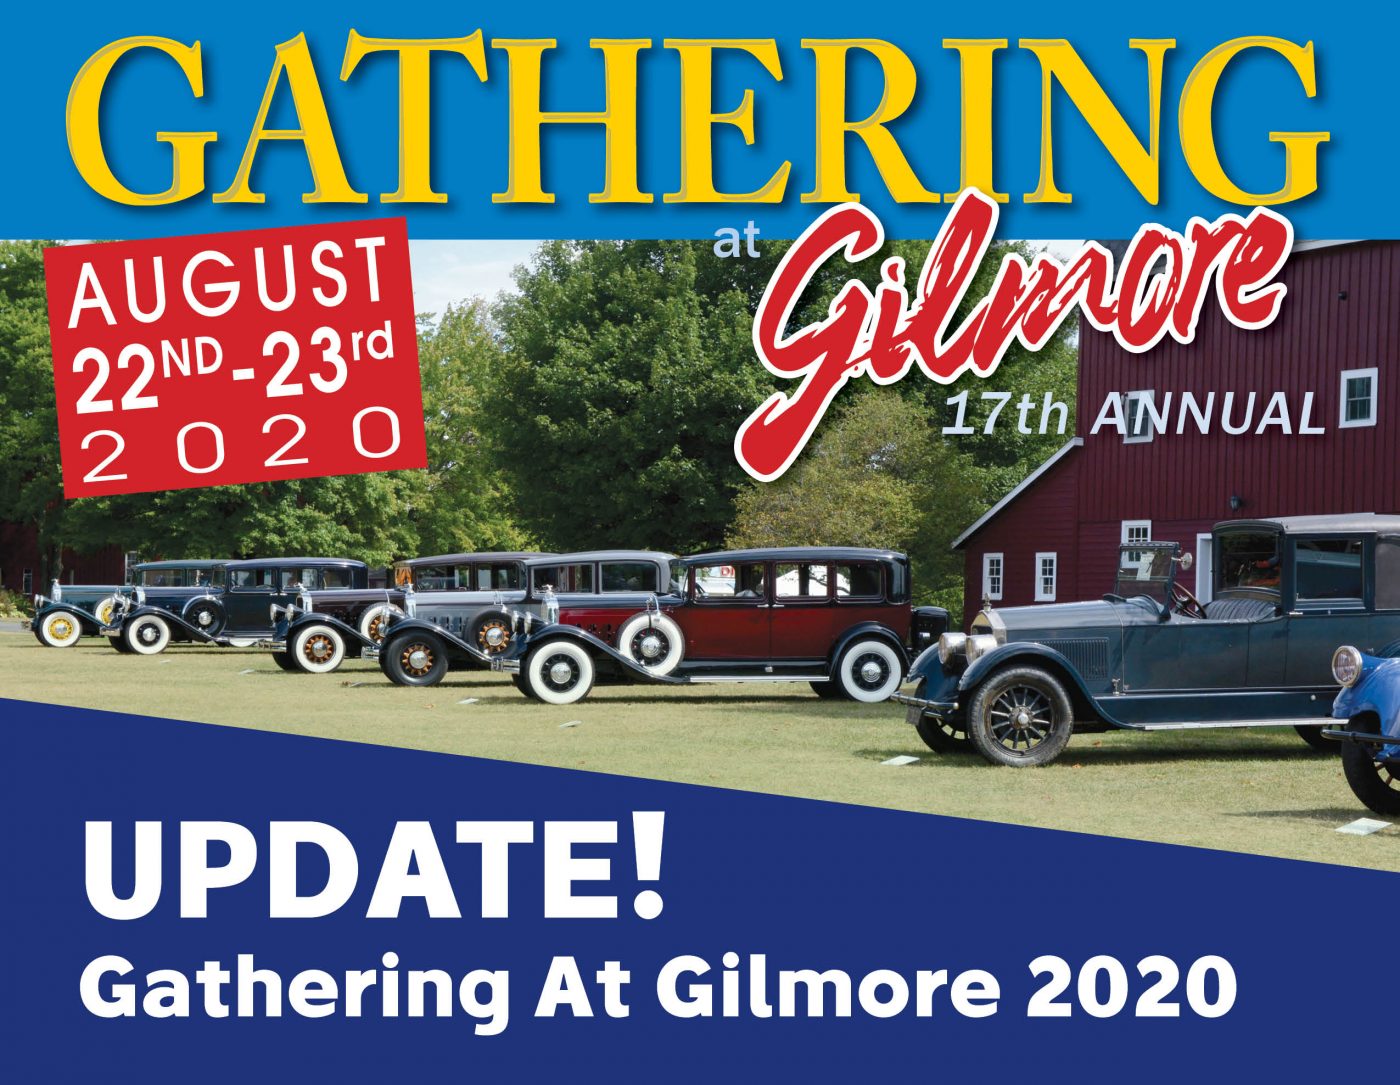 Gathering at the Gilmore 2020